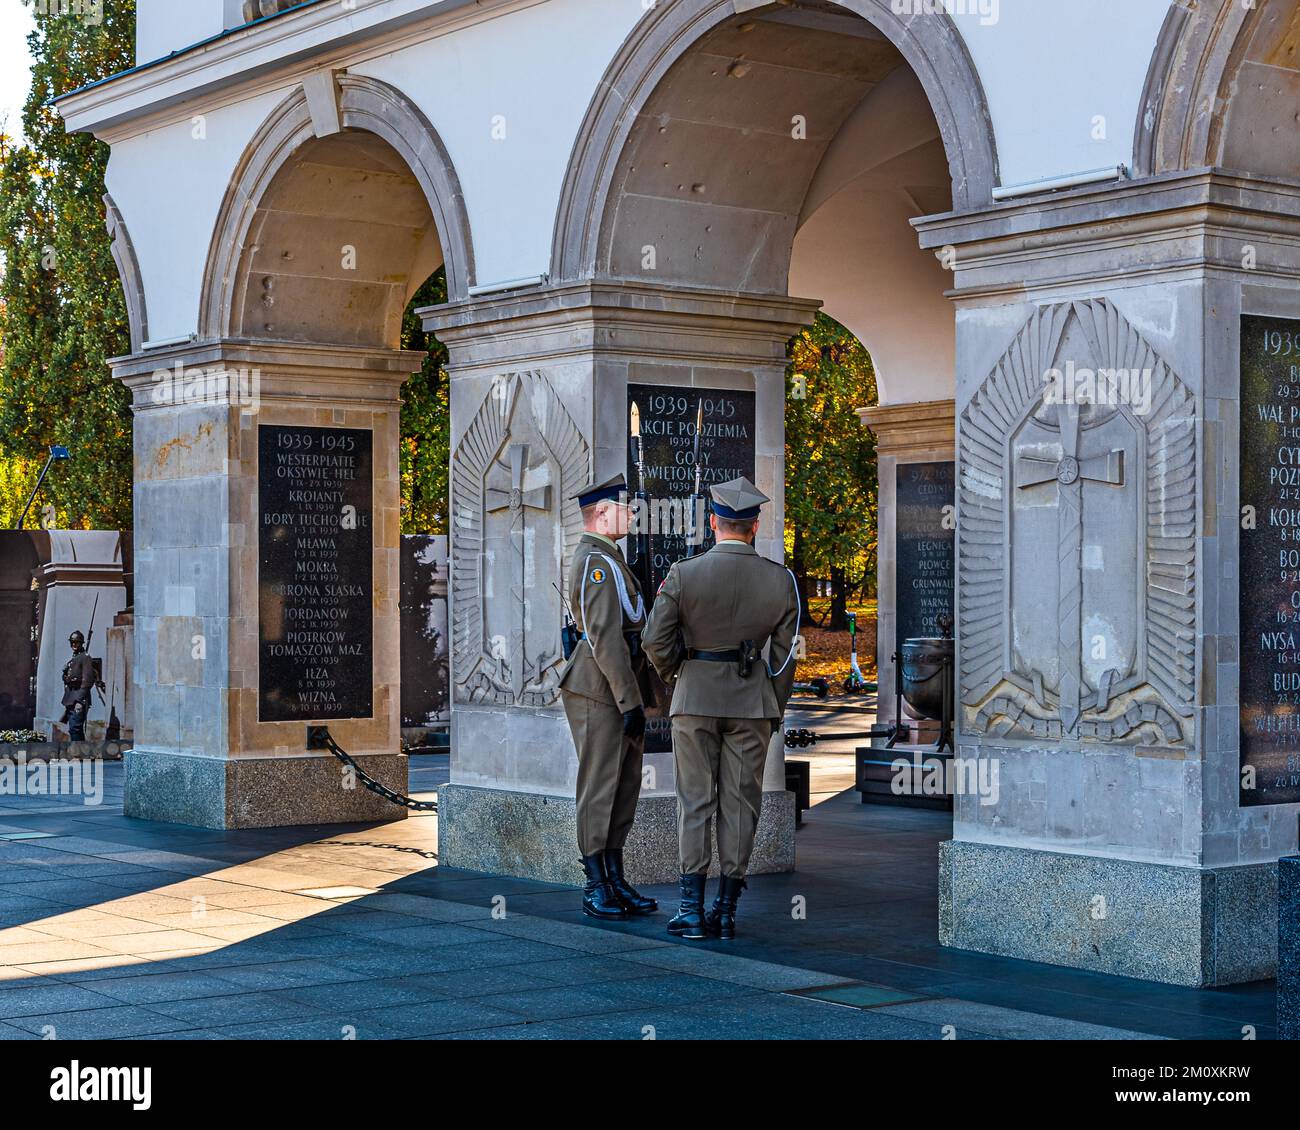 The Tomb of the Unknown Soldier in Warsaw - the grave of the unknown soldier in Warsaw, at pl. march. Józef Piłsudski. Stock Photo